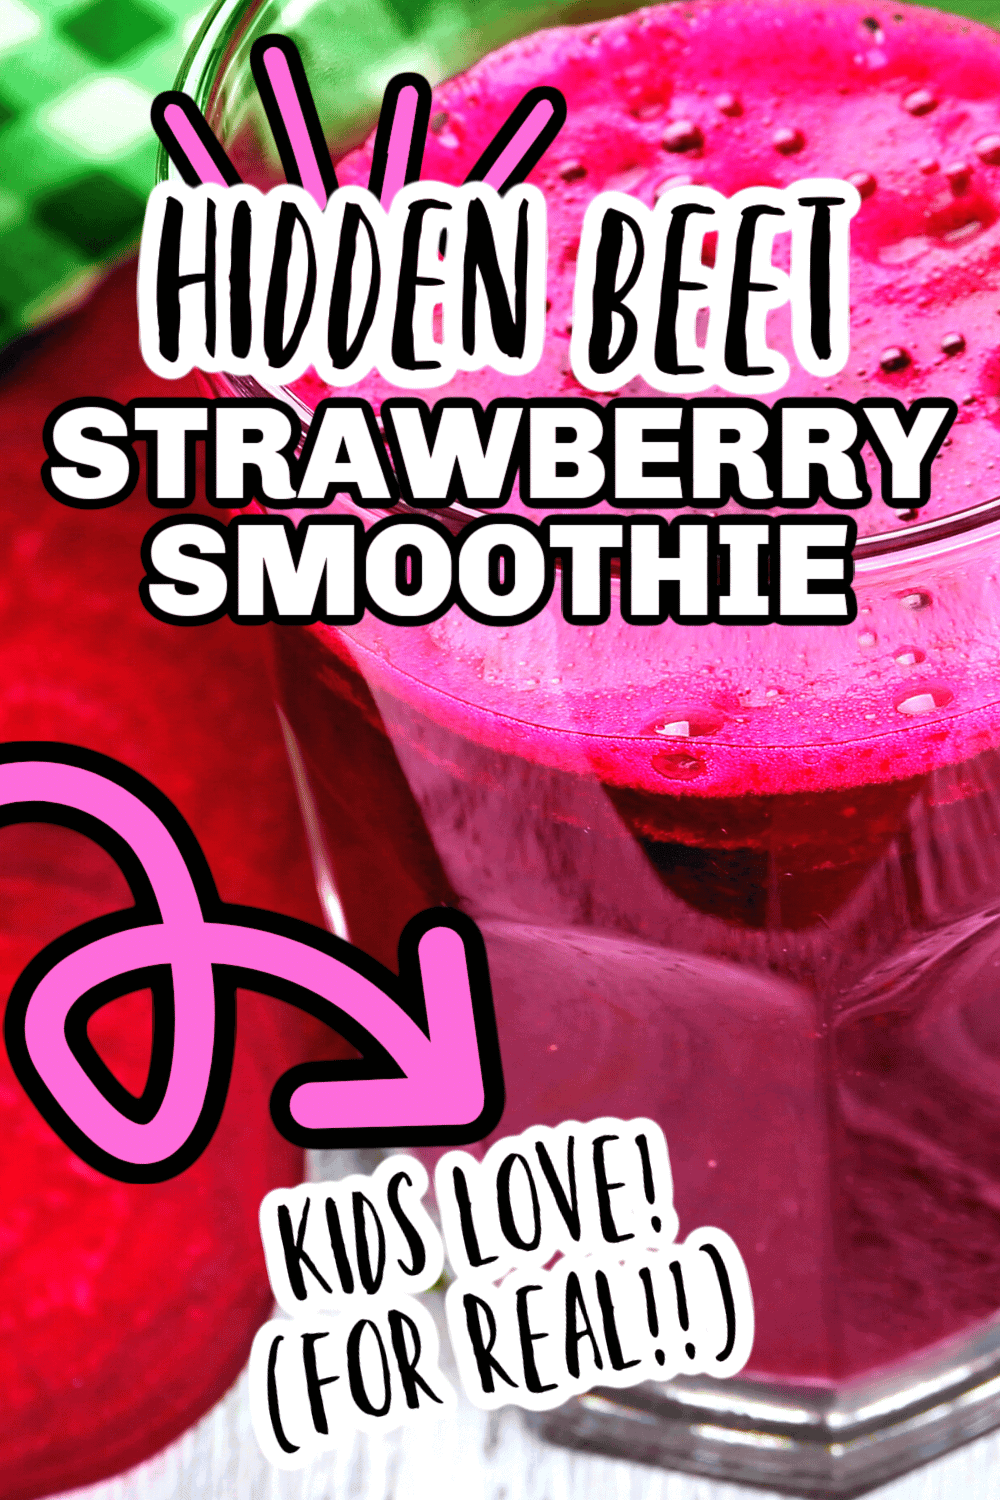 Beet Smoothie For Kids (Hidden Vegetable Smoothies for Toddlers) - Kid Approved Smoothie Recipe! text over bright pink beet smoothie for kids